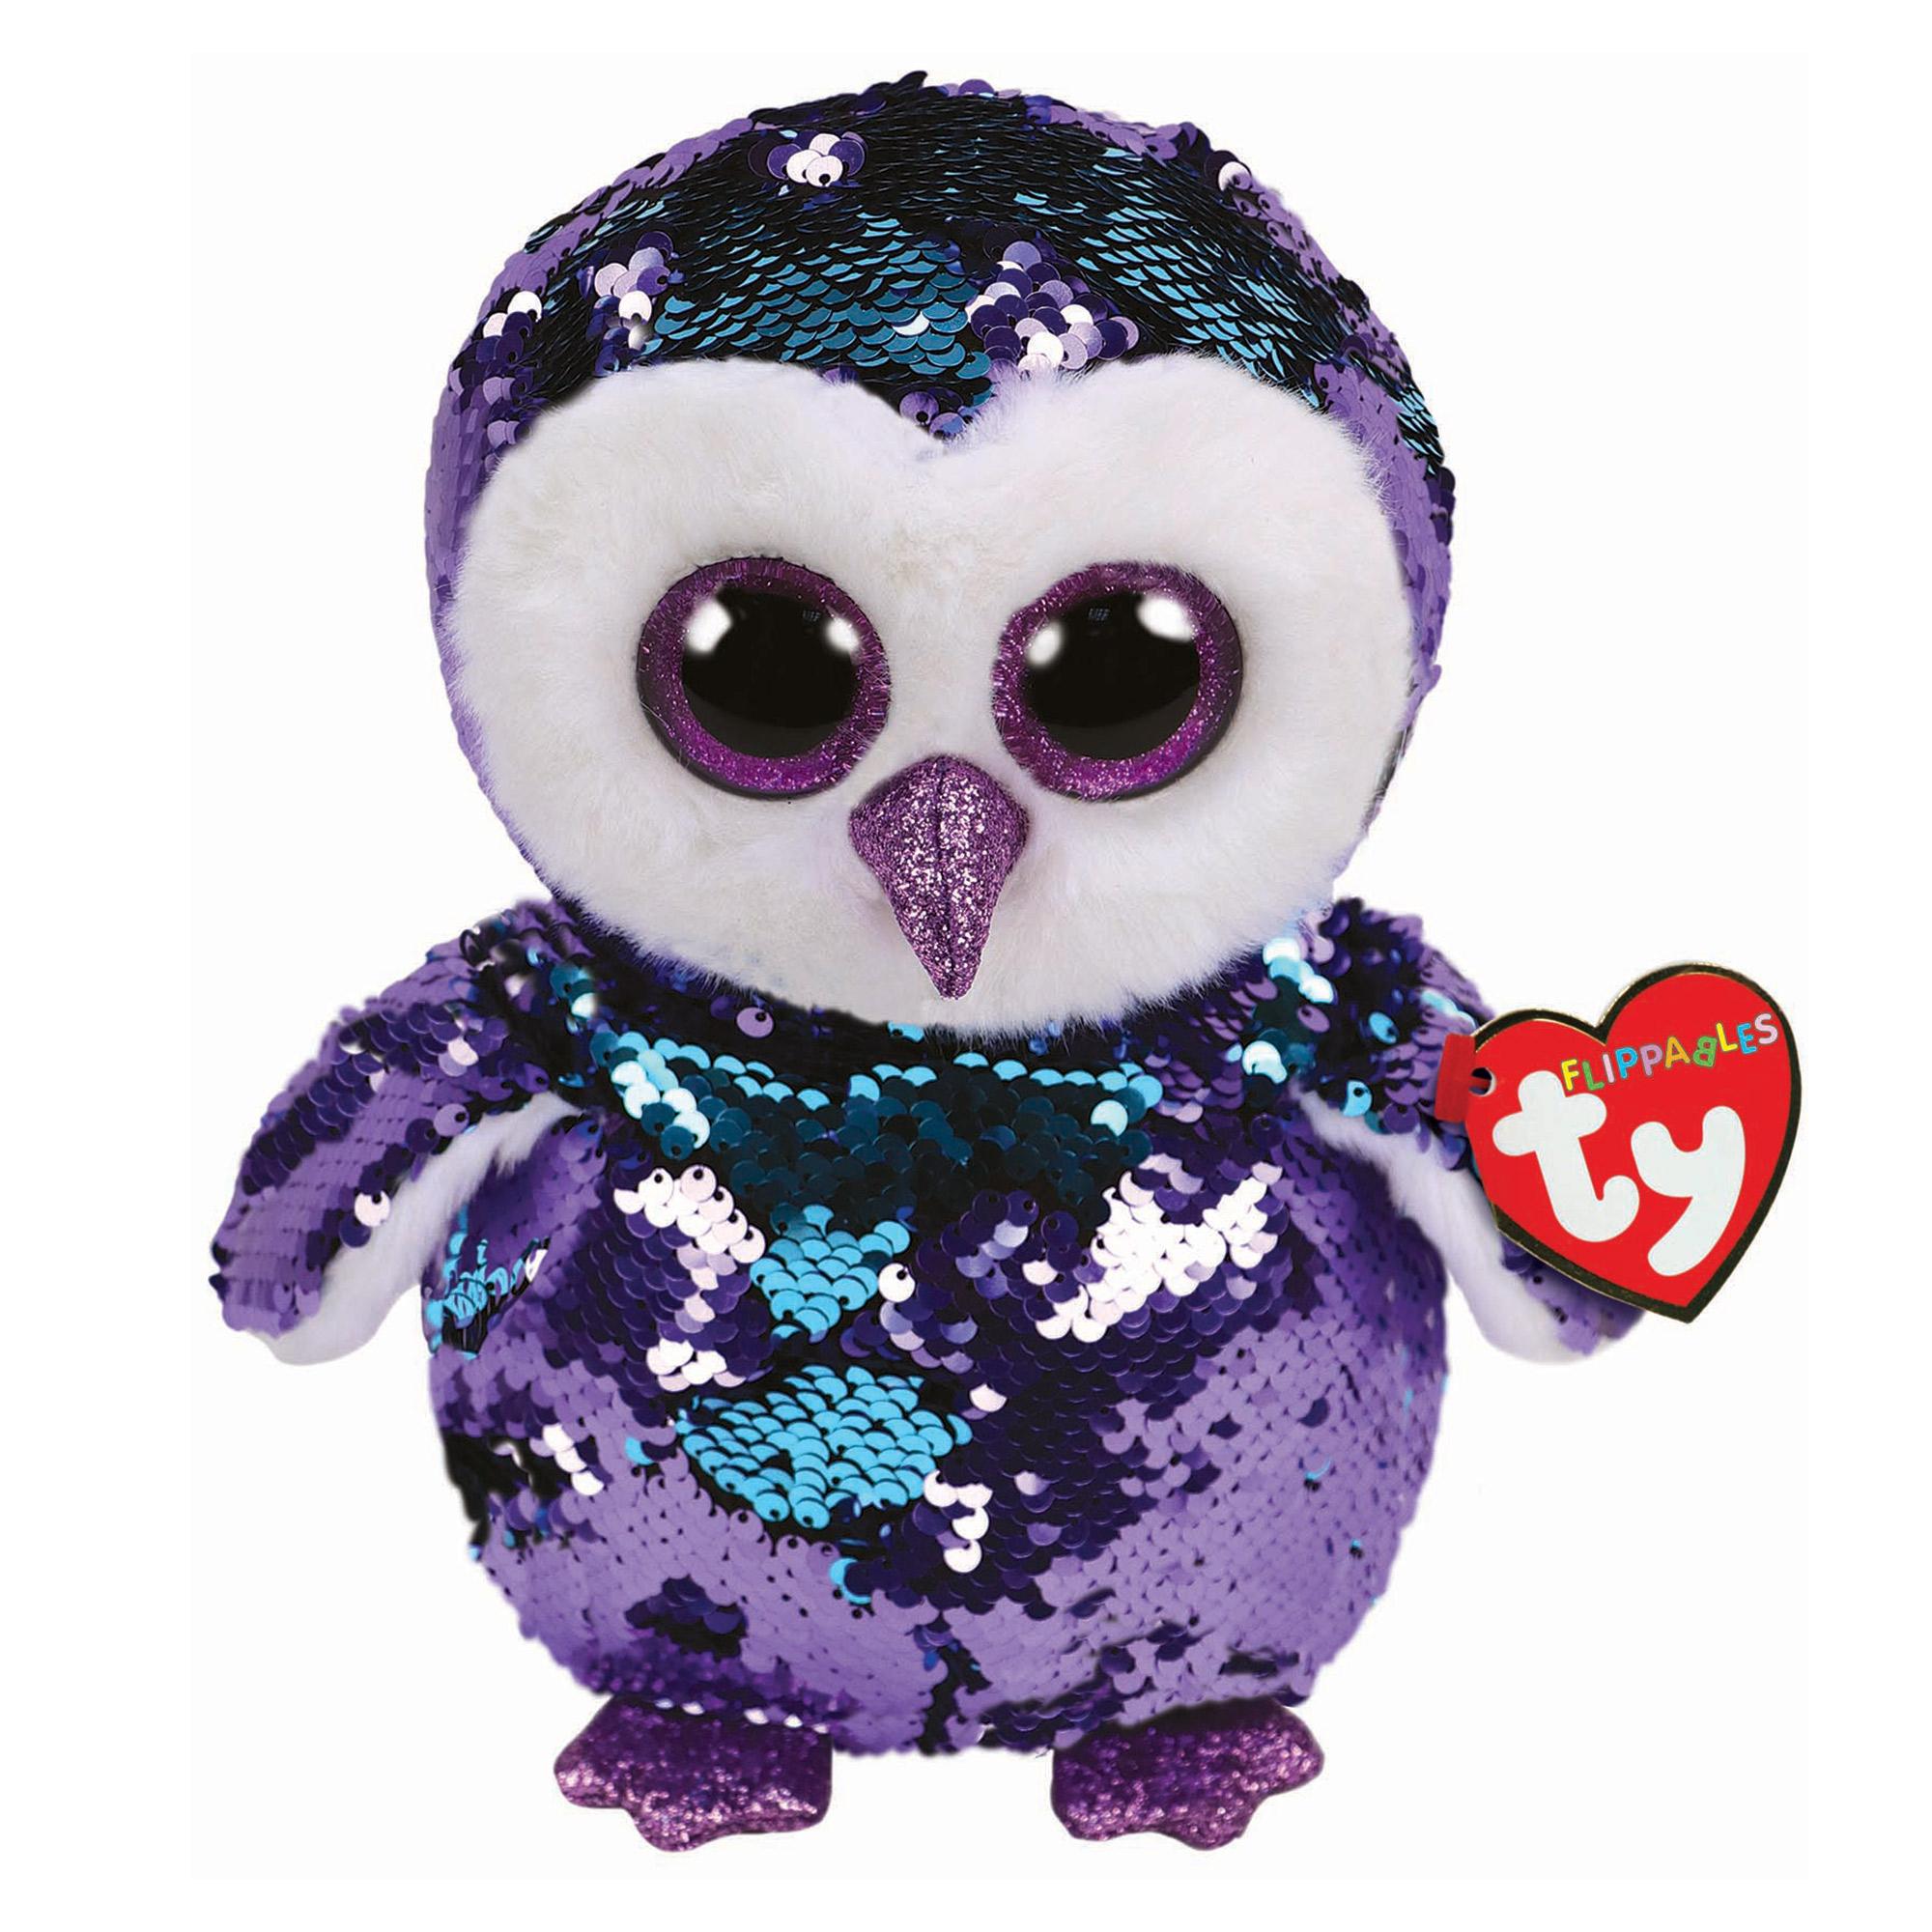 6 Inch Ty Beanie Boos Moonlight The Owl 2019 MWMT in Hand for sale online 